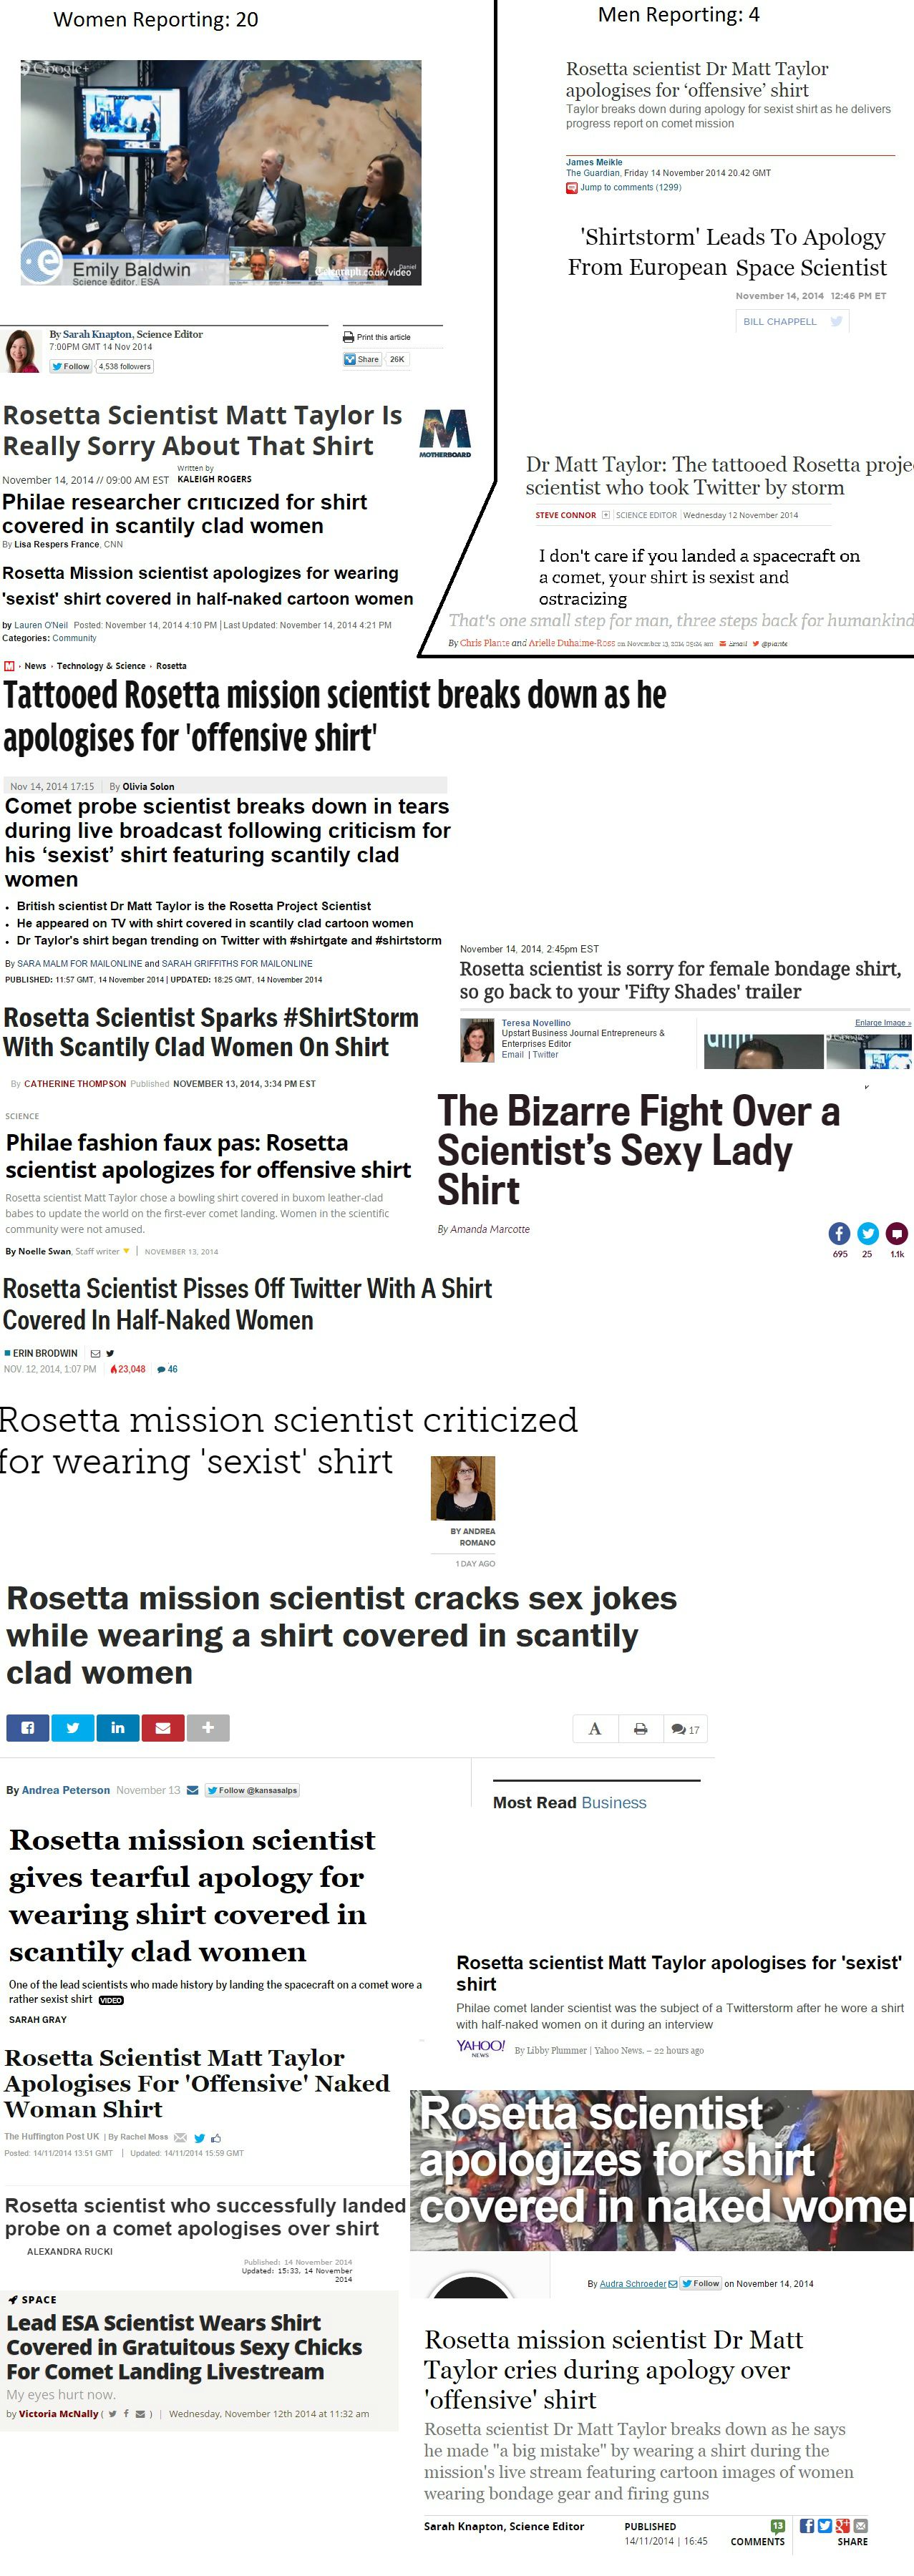 Rosetta lands on Comet, a world first. Feminists *** it up with this shit.